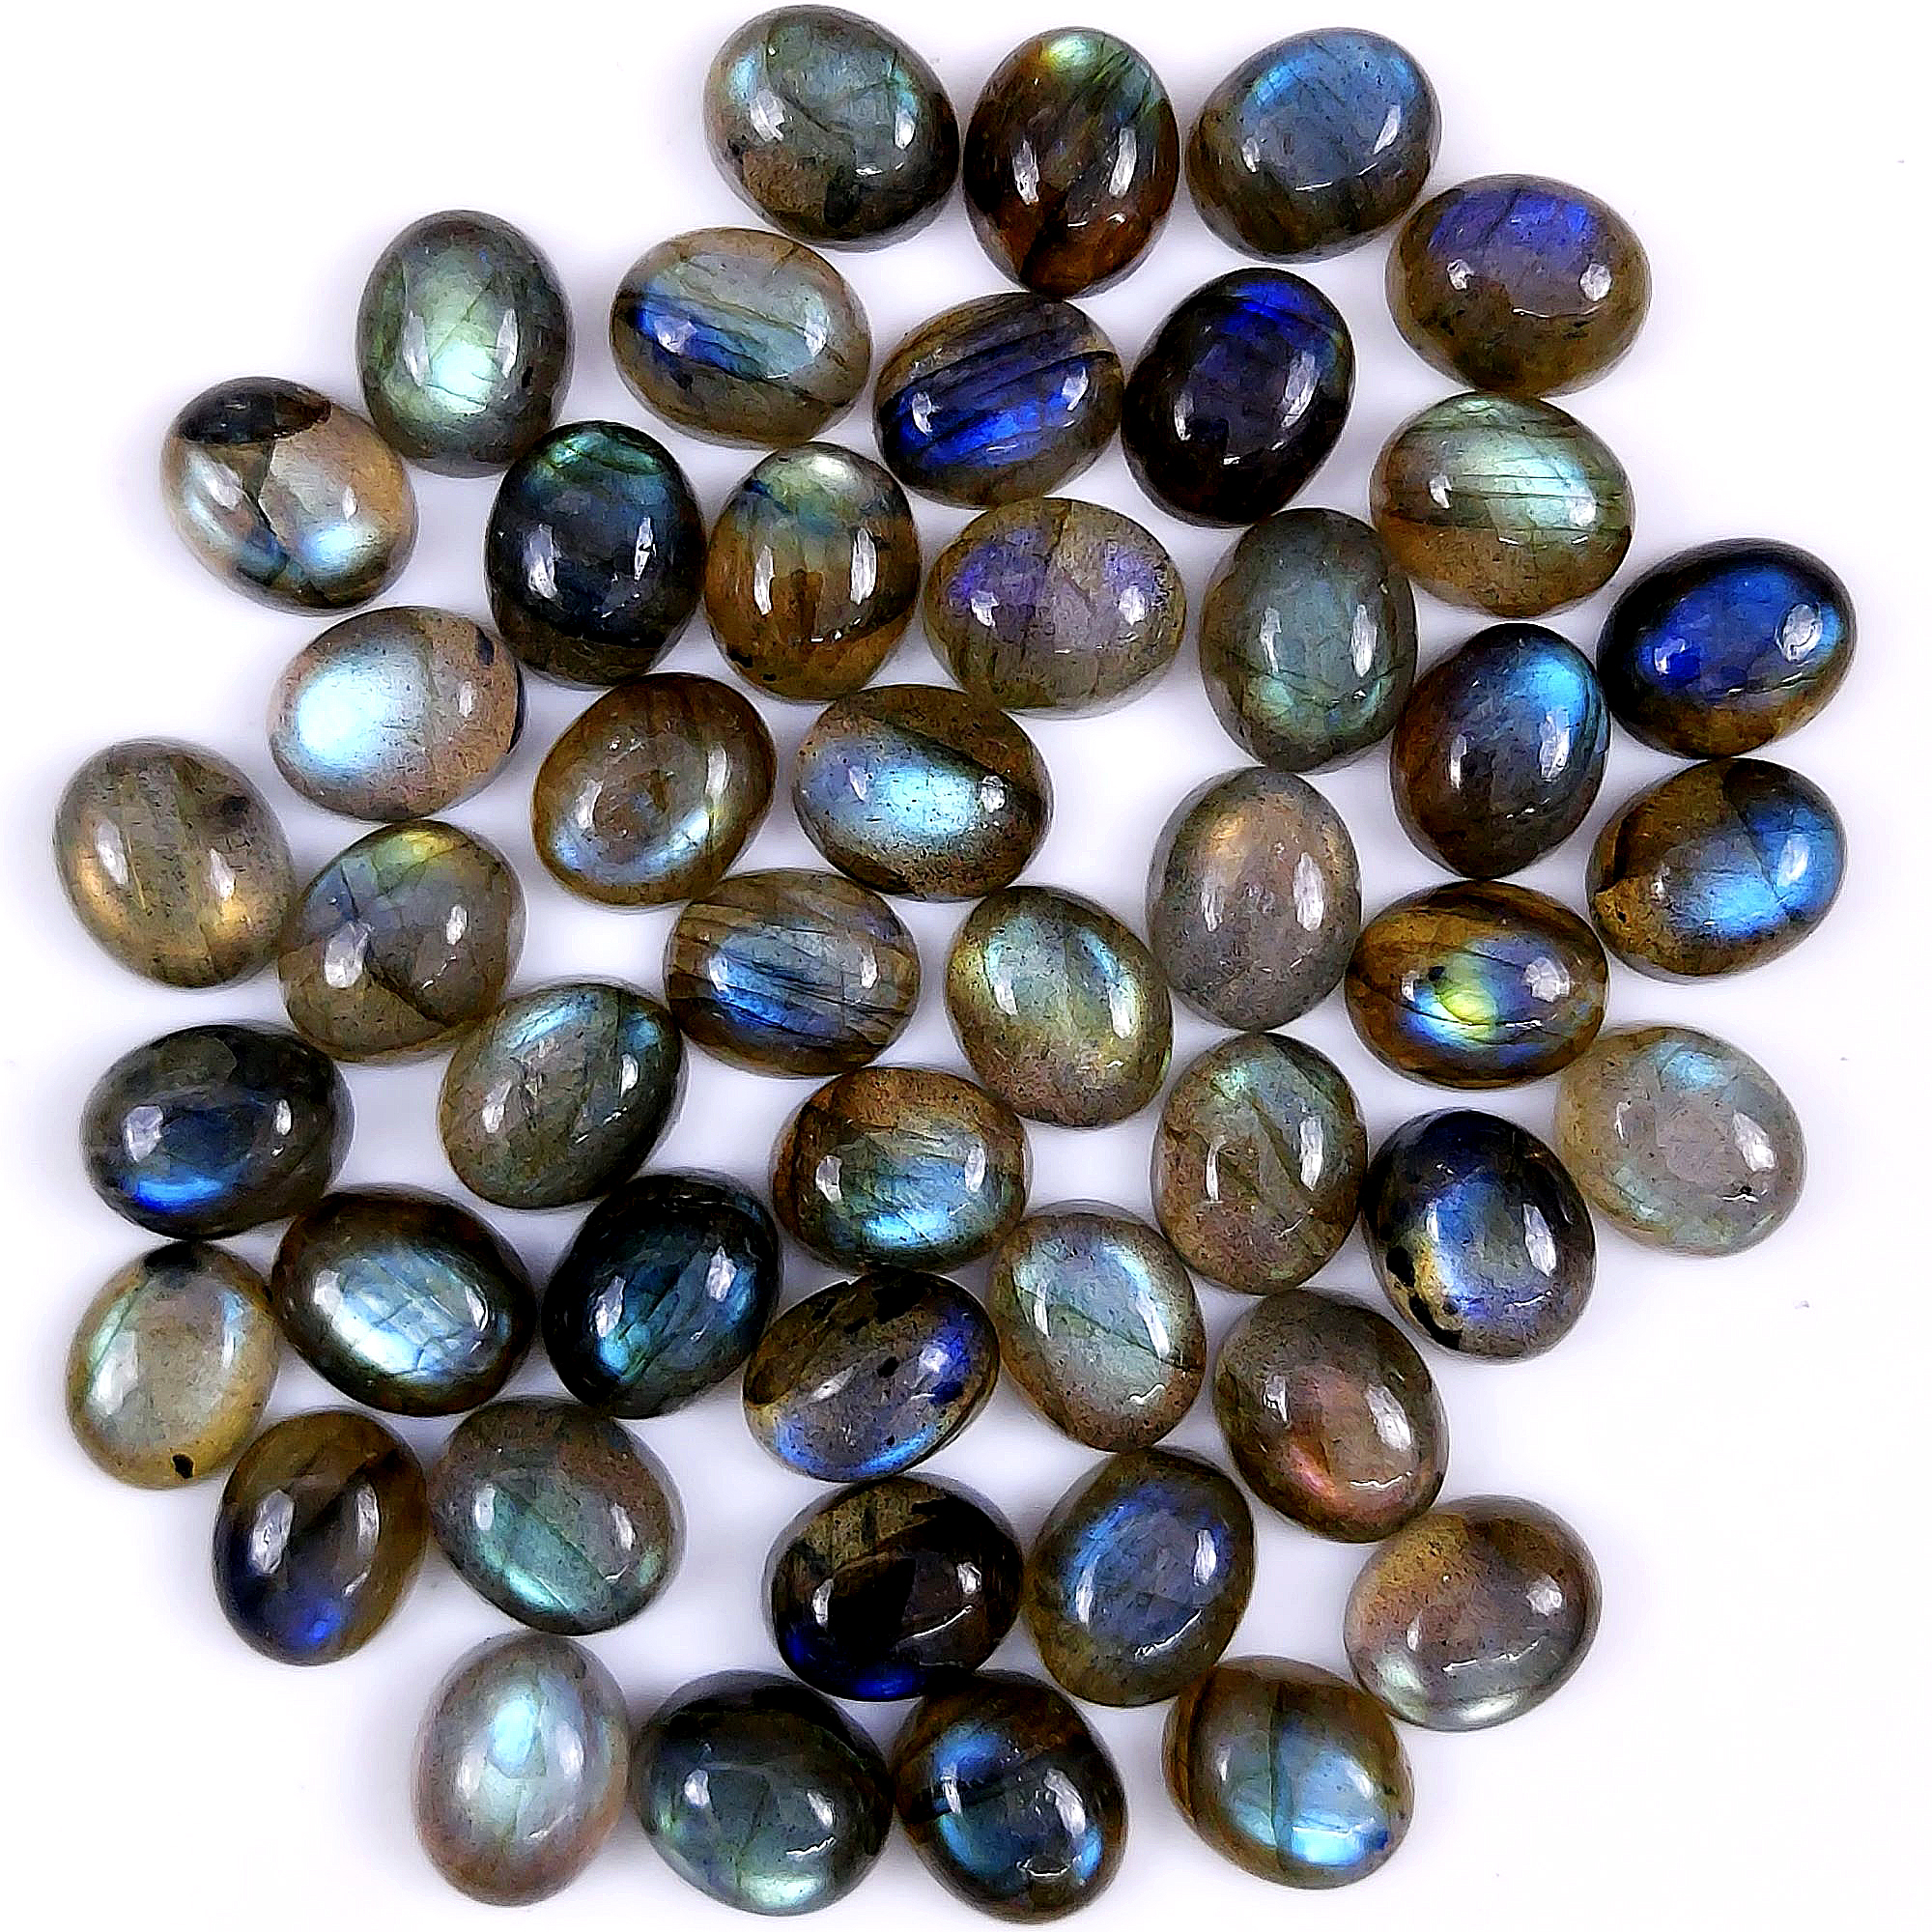 47 Pcs 190Cts Natural Labradorite Cabochon oval Shape Multifire Calibrated Loose Gemstone for jewelry making Wholesale Lots Size9x11mm#G-1579